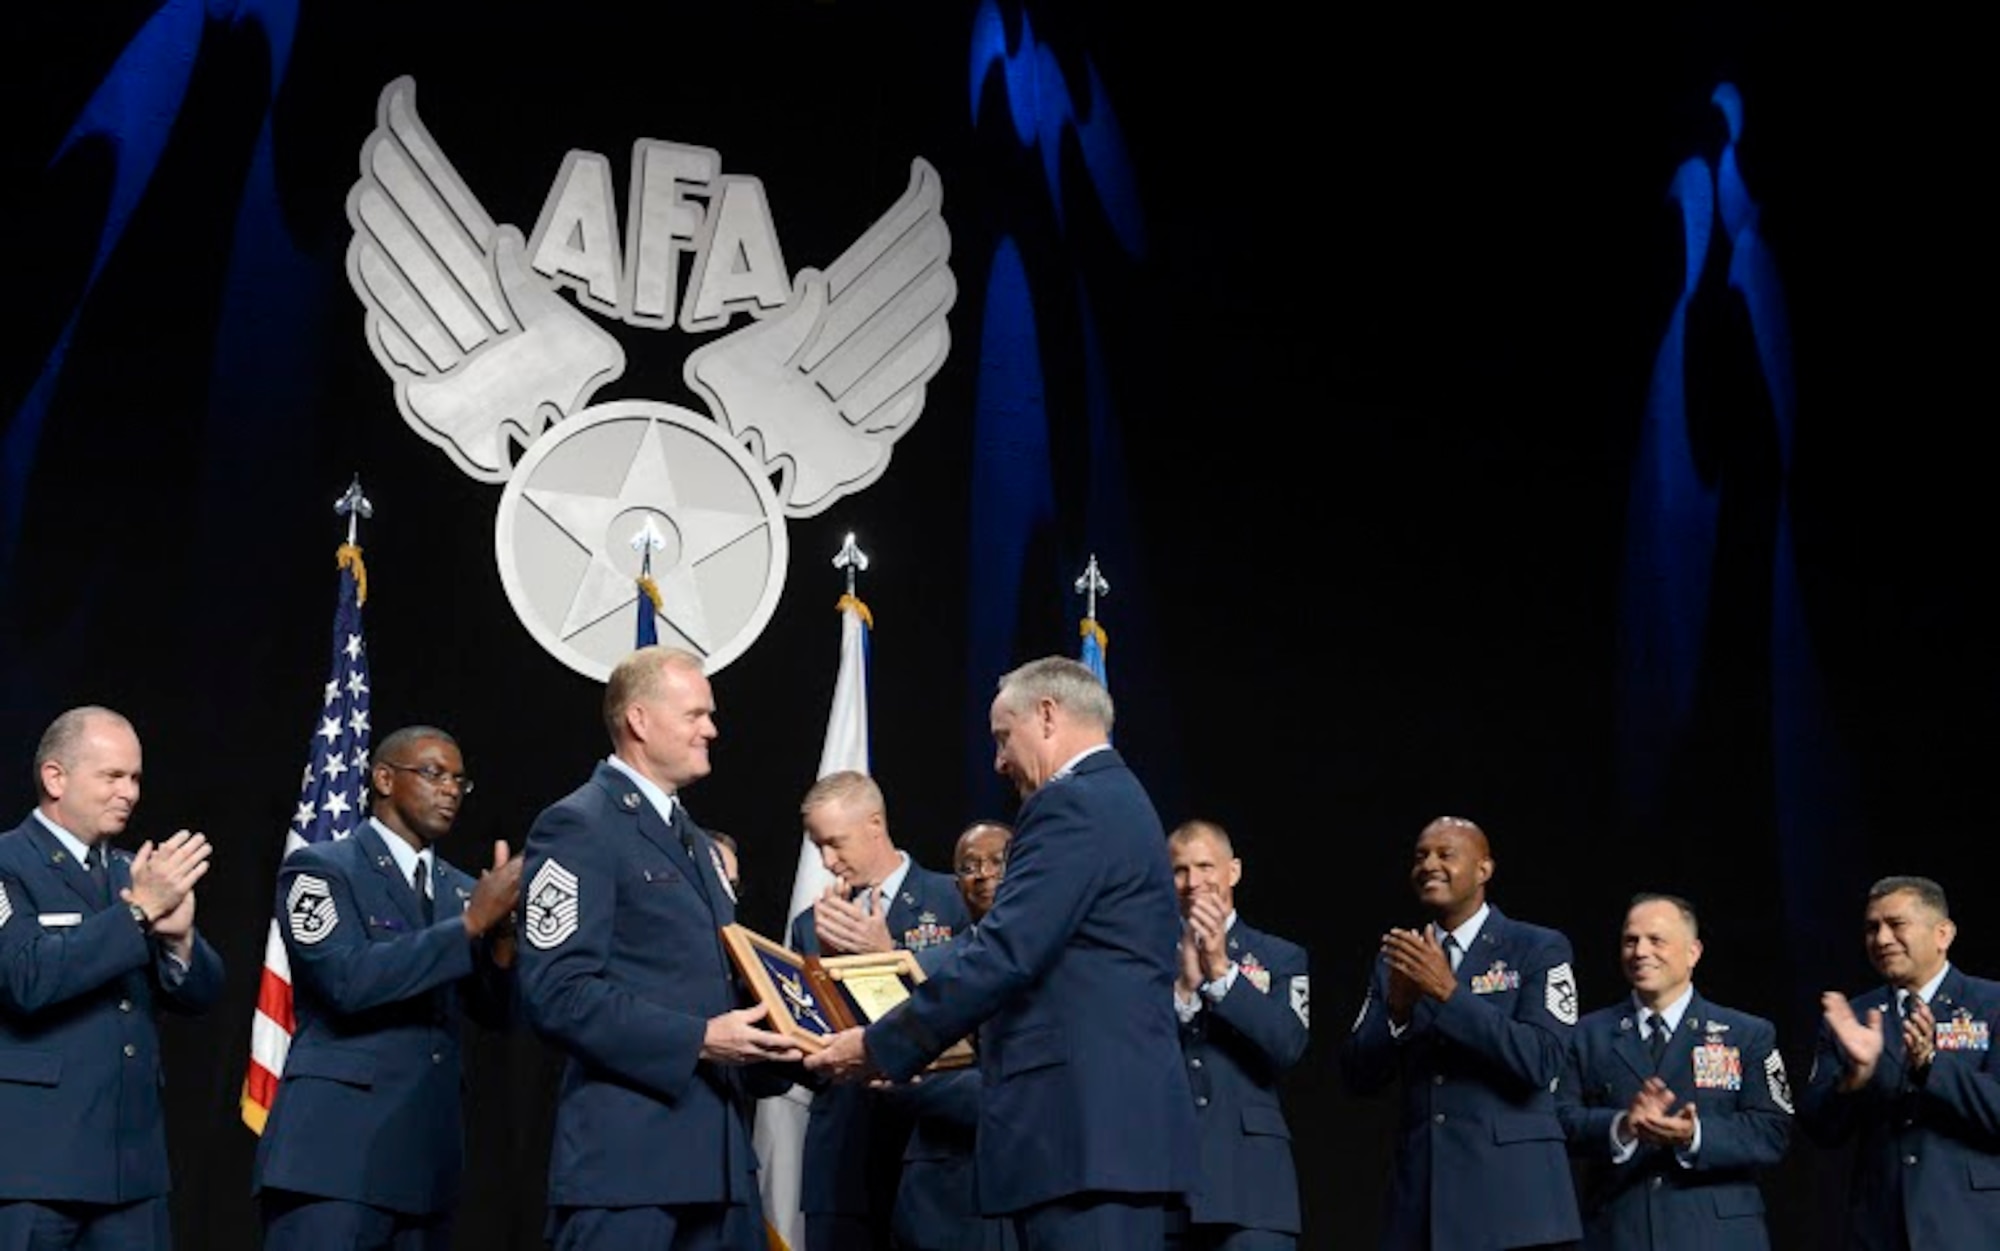 Chief Master Sgt. of the Air Force James A. Cody thanks Air Force Chief of Staff Gen. Mark A. Welsh III for his exceptional service by presenting him with an invitation to an Order of the Sword ceremony following Cody's Enlisted Force Update at the Air Force Association's Air and Space Conference and Technology Exposition Sept. 16, 2015, in Washington, D.C. (U.S. Air Force photo/Scott M. Ash)  